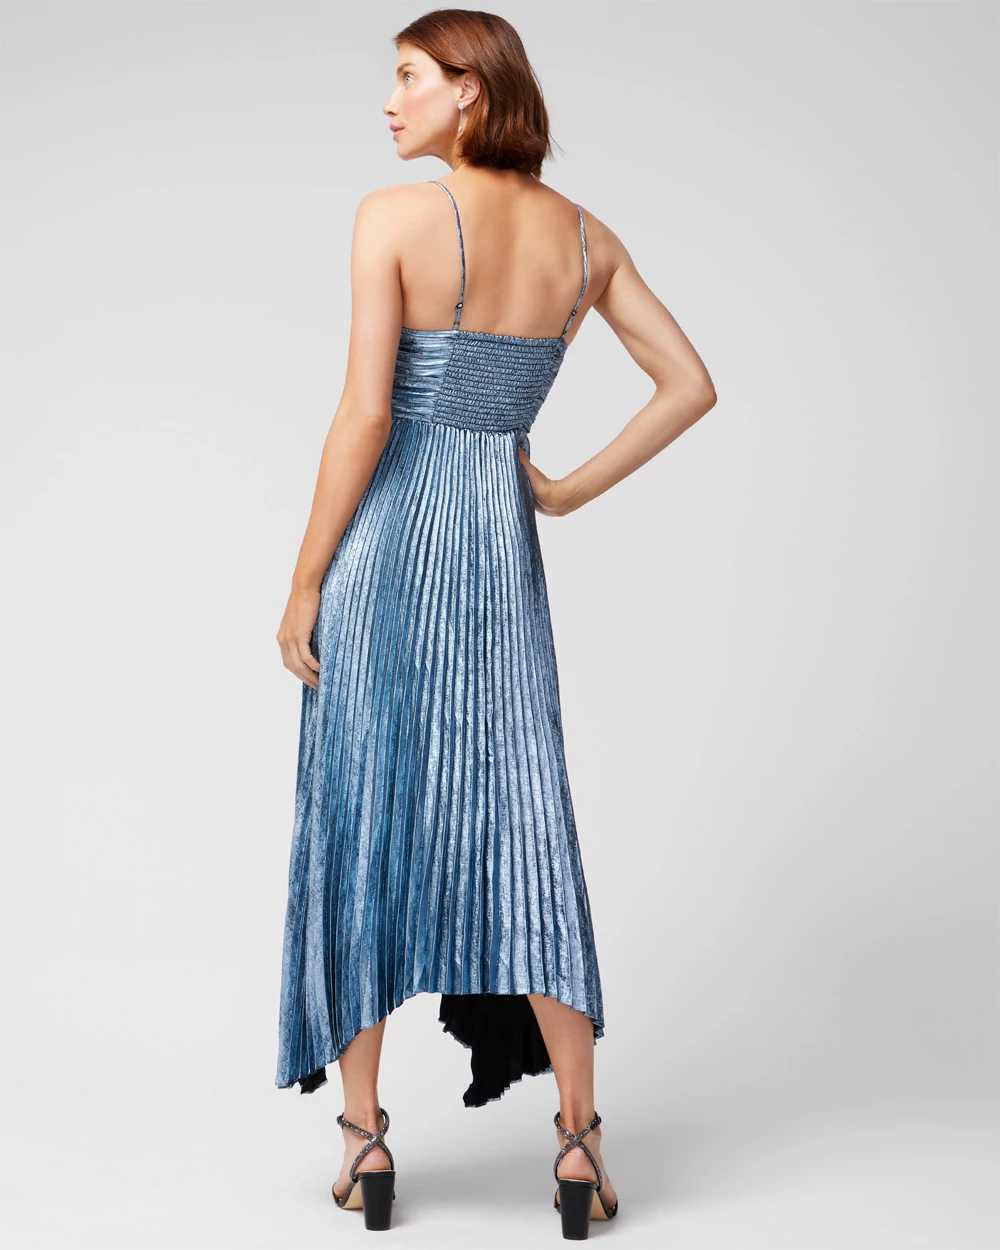 Pleated Metallic Midi Dress click to view larger image.